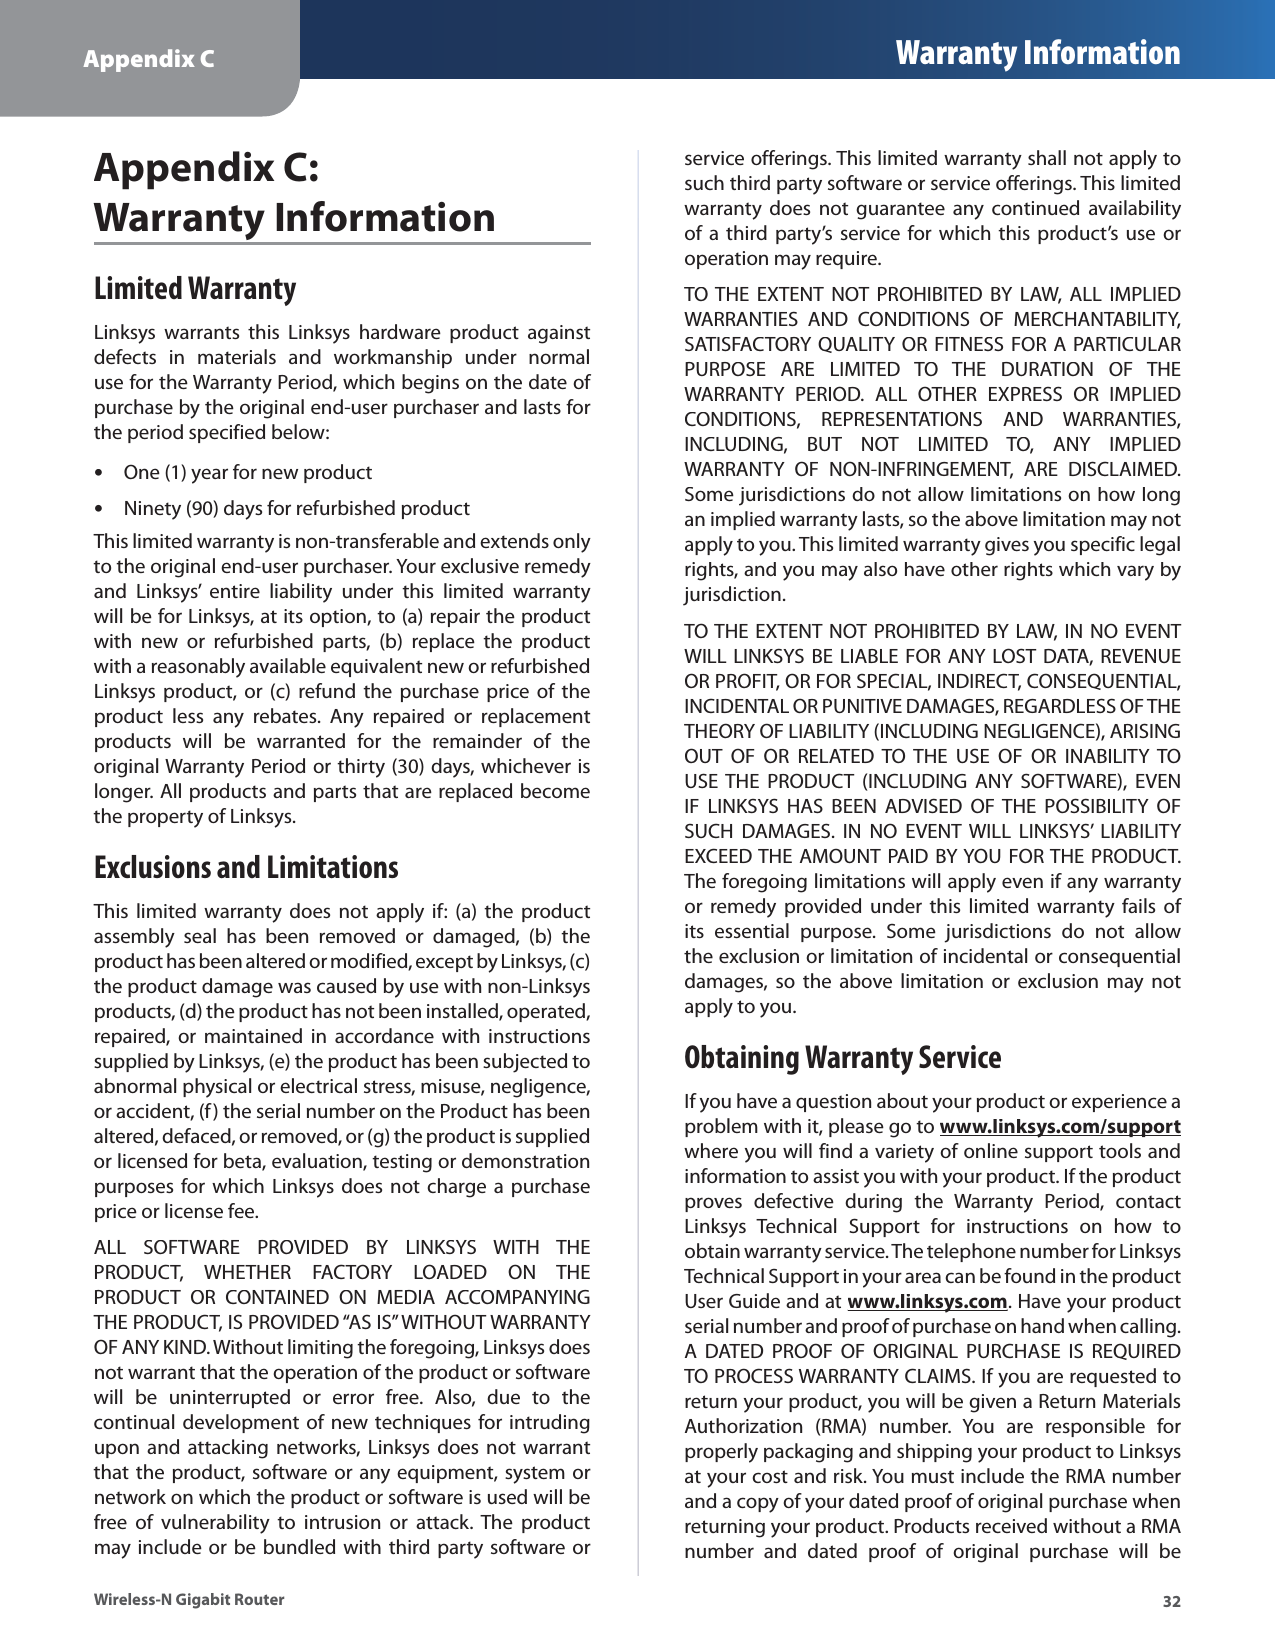 Appendix C Warranty Information32Wireless-N Gigabit RouterAppendix C:  Warranty InformationLimited WarrantyLinksys warrants this Linksys hardware product againstdefects in materials and workmanship under normaluse for the Warranty Period, which begins on the date of purchase by the original end-user purchaser and lasts forthe period specified below:One (1) year for new productsNinety (90) days for refurbished productsThis limited warranty is non-transferable and extends onlyto the original end-user purchaser. Your exclusive remedyand Linksys’ entire liability under this limited warrantywill be for Linksys, at its option, to (a) repair the productwith new or refurbished parts, (b) replace the productwith a reasonably available equivalent new or refurbishedLinksys product, or (c) refund the purchase price of theproduct less any rebates. Any repaired or replacementproducts will be warranted for the remainder of theoriginal Warranty Period or thirty (30) days, whichever islonger. All products and parts that are replaced becomethe property of Linksys.Exclusions and LimitationsThis limited warranty does not apply if: (a) the productassembly seal has been removed or damaged, (b) theproduct has been altered or modified, except by Linksys, (c)the product damage was caused by use with non-Linksys products, (d) the product has not been installed, operated,repaired, or maintained in accordance with instructionssupplied by Linksys, (e) the product has been subjected toabnormal physical or electrical stress, misuse, negligence,or accident, (f) the serial number on the Product has beenaltered, defaced, or removed, or (g) the product is suppliedor licensed for beta, evaluation, testing or demonstrationpurposes for which Linksys does not charge a purchaseprice or license fee.ALL SOFTWARE PROVIDED BY LINKSYS WITH THEPRODUCT, WHETHER FACTORY LOADED ON THEPRODUCT OR CONTAINED ON MEDIA ACCOMPANYINGTHE PRODUCT, IS PROVIDED “AS IS” WITHOUT WARRANTYOF ANY KIND. Without limiting the foregoing, Linksys doesnot warrant that the operation of the product or softwarewill be uninterrupted or error free. Also, due to thecontinual development of new techniques for intrudingupon and attacking networks, Linksys does not warrantthat the product, software or any equipment, system ornetwork on which the product or software is used will befree of vulnerability to intrusion or attack. The productmay include or be bundled with third party software orservice offerings. This limited warranty shall not apply tosuch third party software or service offerings. This limitedwarranty does not guarantee any continued availabilityof a third party’s service for which this product’s use oroperation may require.TO THE EXTENT NOT PROHIBITED BY LAW, ALL IMPLIEDWARRANTIES AND CONDITIONS OF MERCHANTABILITY,SATISFACTORY QUALITY OR FITNESS FOR A PARTICULARPURPOSE ARE LIMITED TO THE DURATION OF THEWARRANTY PERIOD. ALL OTHER EXPRESS OR IMPLIEDCONDITIONS, REPRESENTATIONS AND WARRANTIES,INCLUDING, BUT NOT LIMITED TO, ANY IMPLIEDWARRANTY OF NON-INFRINGEMENT, ARE DISCLAIMED.Some jurisdictions do not allow limitations on how longan implied warranty lasts, so the above limitation may notapply to you. This limited warranty gives you specific legalrights, and you may also have other rights which vary byjurisdiction.TO THE EXTENT NOT PROHIBITED BY LAW, IN NO EVENT WILL LINKSYS BE LIABLE FOR ANY LOST DATA, REVENUEOR PROFIT, OR FOR SPECIAL, INDIRECT, CONSEQUENTIAL,INCIDENTAL OR PUNITIVE DAMAGES, REGARDLESS OF THETHEORY OF LIABILITY (INCLUDING NEGLIGENCE), ARISINGOUT OF OR RELATED TO THE USE OF OR INABILITY TOUSE THE PRODUCT (INCLUDING ANY SOFTWARE), EVENIF LINKSYS HAS BEEN ADVISED OF THE POSSIBILITY OFSUCH DAMAGES. IN NO EVENT WILL LINKSYS’ LIABILITYEXCEED THE AMOUNT PAID BY YOU FOR THE PRODUCT.The foregoing limitations will apply even if any warrantyor remedy provided under this limited warranty fails of its essential purpose. Some jurisdictions do not allowthe exclusion or limitation of incidental or consequentialdamages, so the above limitation or exclusion may notapply to you.Obtaining Warranty ServiceIf you have a question about your product or experience aproblem with it, please go towww.linksys.com/supportyppwhere you will find a variety of online support tools andinformation to assist you with your product. If the productproves defective during the Warranty Period, contactLinksys Technical Support for instructions on how toobtain warranty service. The telephone number for LinksysTechnical Support in your area can be found in the productUser Guide and atwww.linksys.comy. Have your productserial number and proof of purchase on hand when calling.A DATED PROOF OF ORIGINAL PURCHASE IS REQUIREDTO PROCESS WARRANTY CLAIMS. If you are requested toreturn your product, you will be given a Return MaterialsAuthorization (RMA) number. You are responsible forproperly packaging and shipping your product to Linksysat your cost and risk. You must include the RMA numberand a copy of your dated proof of original purchase whenreturning your product. Products received without a RMAnumber and dated proof of original purchase will be